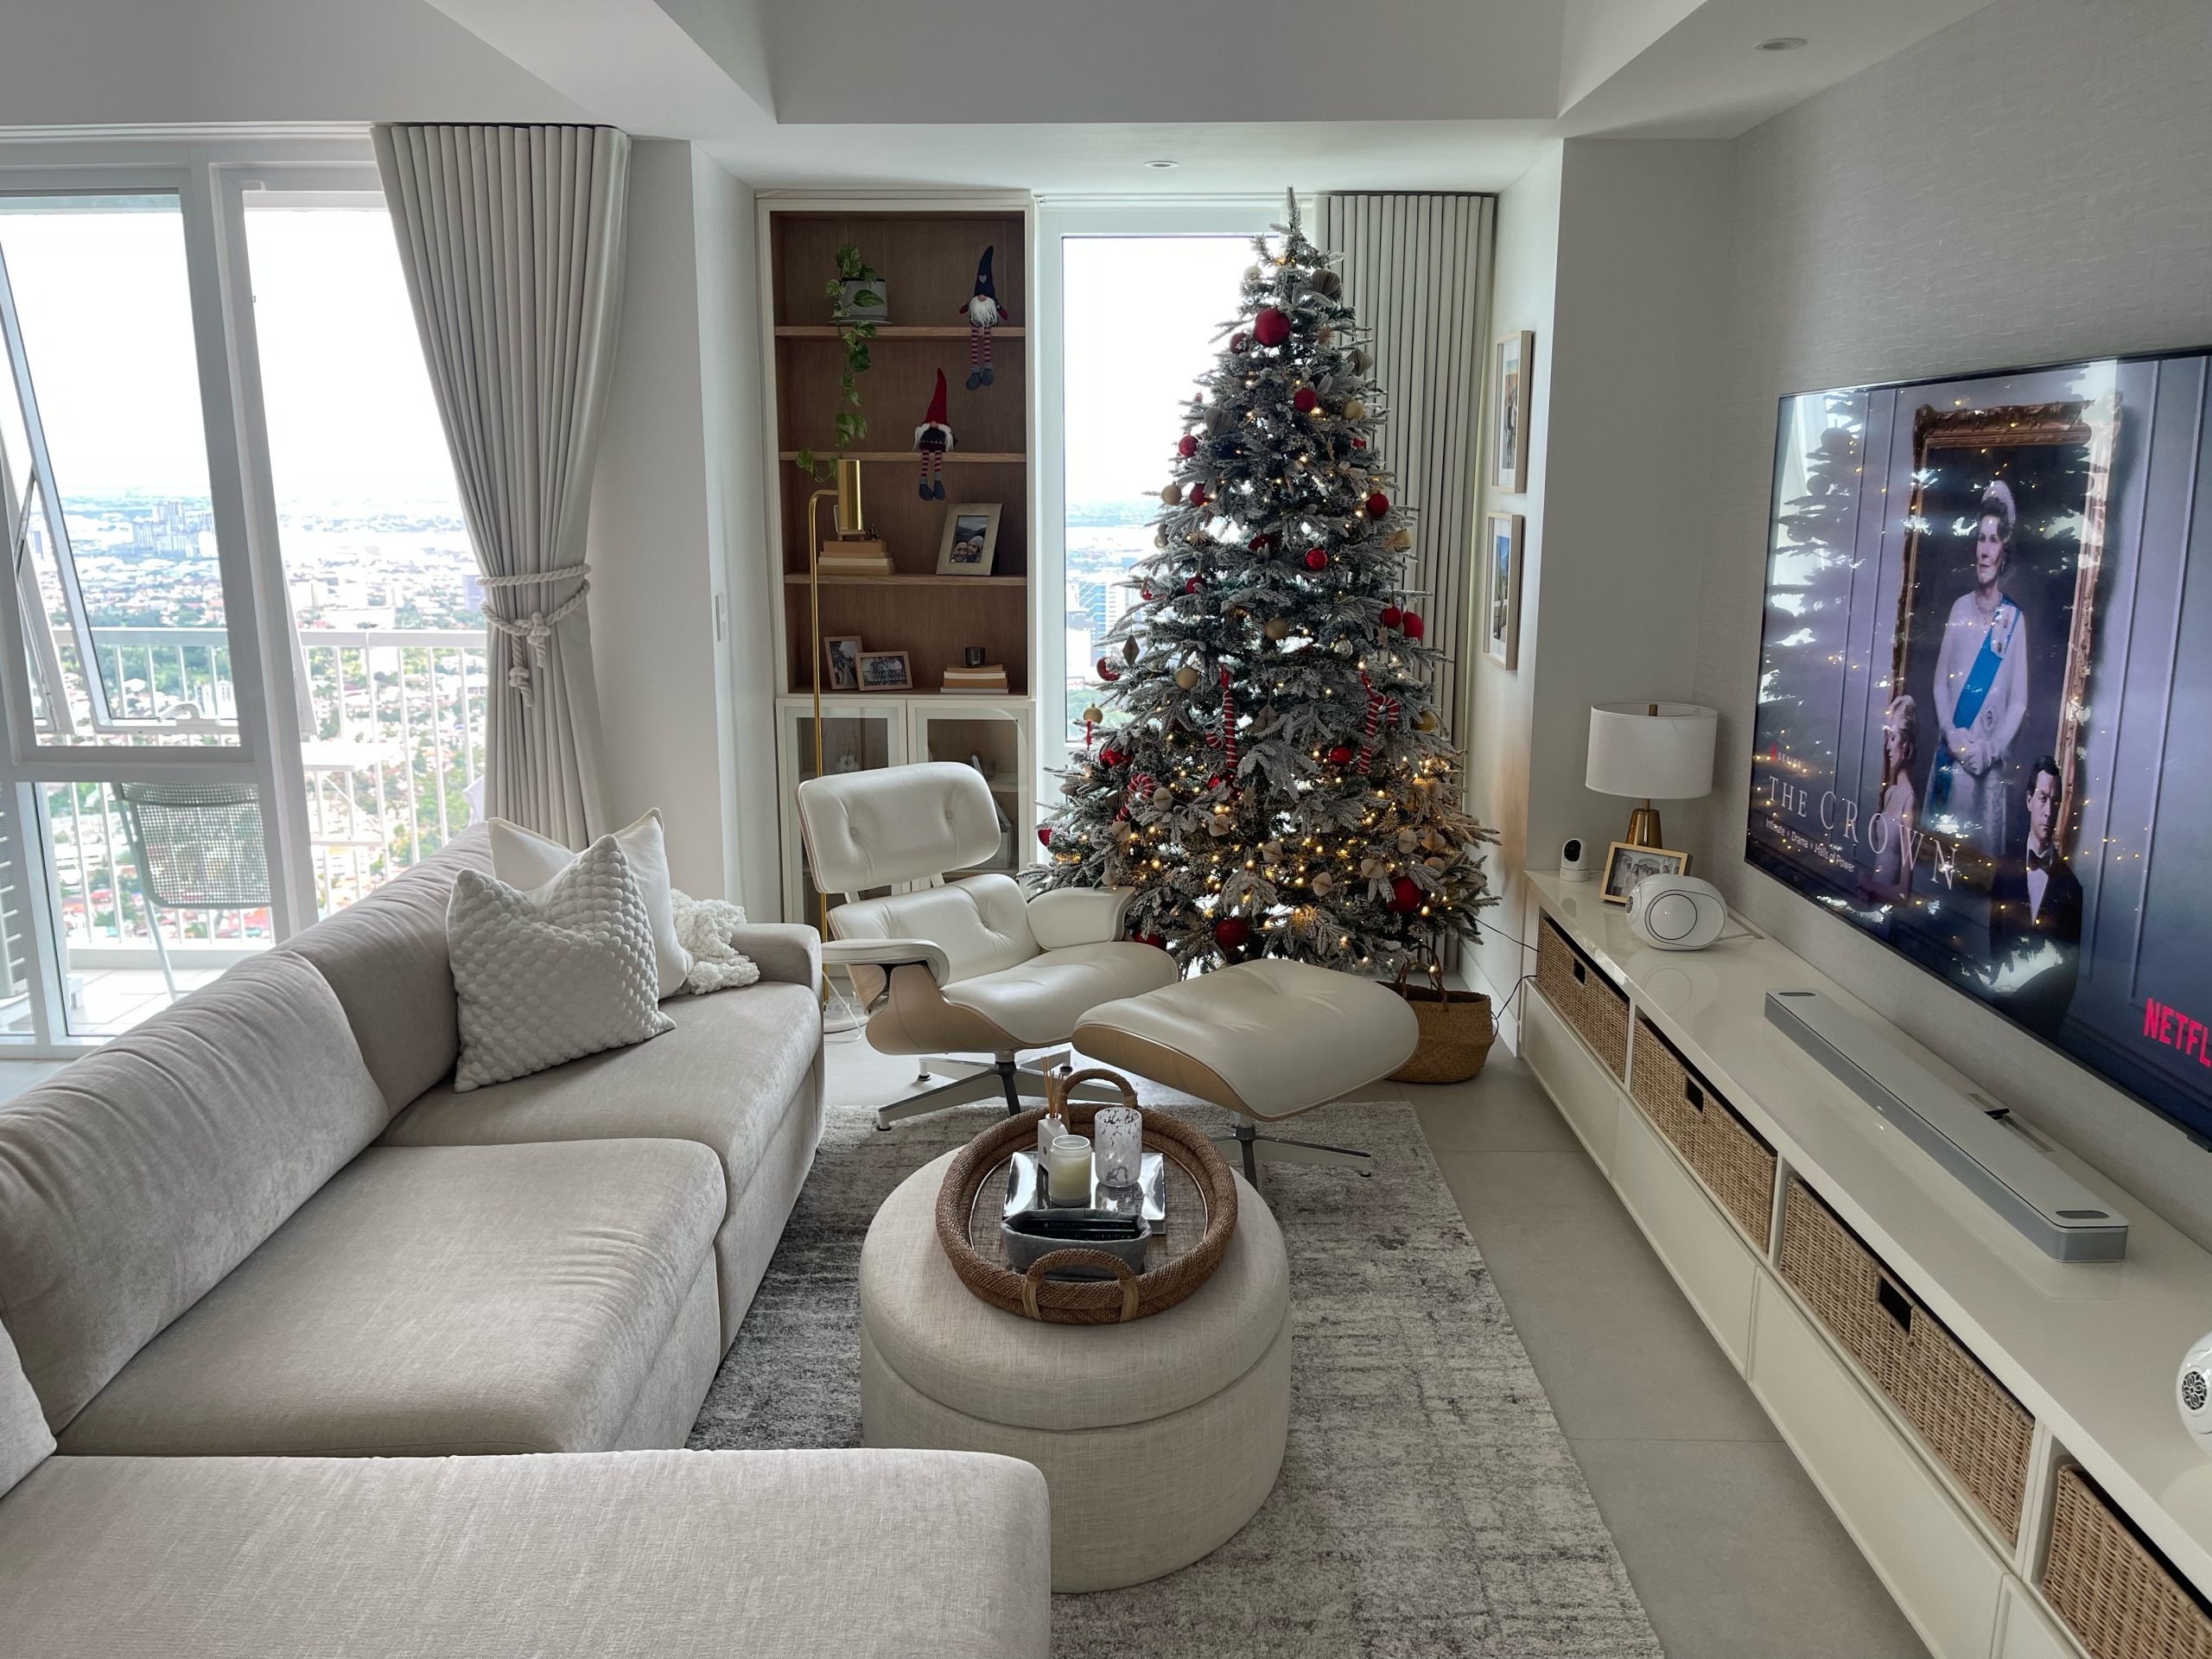 couch with rugs, christmas tree, windows, table